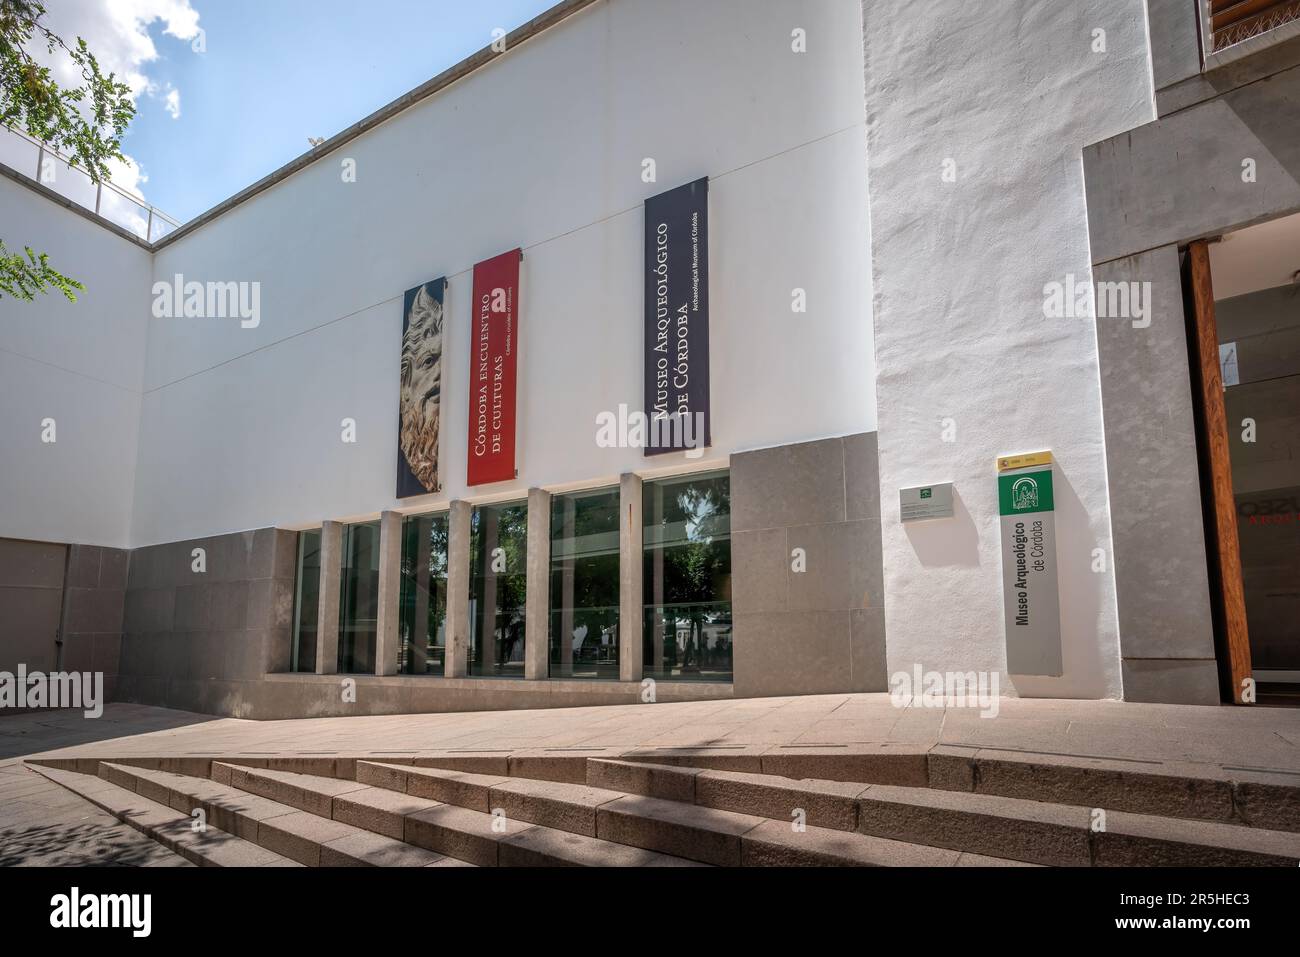 Archaeological and Ethnological Museum of Cordoba - Cordoba, Andalusia, Spain Stock Photo